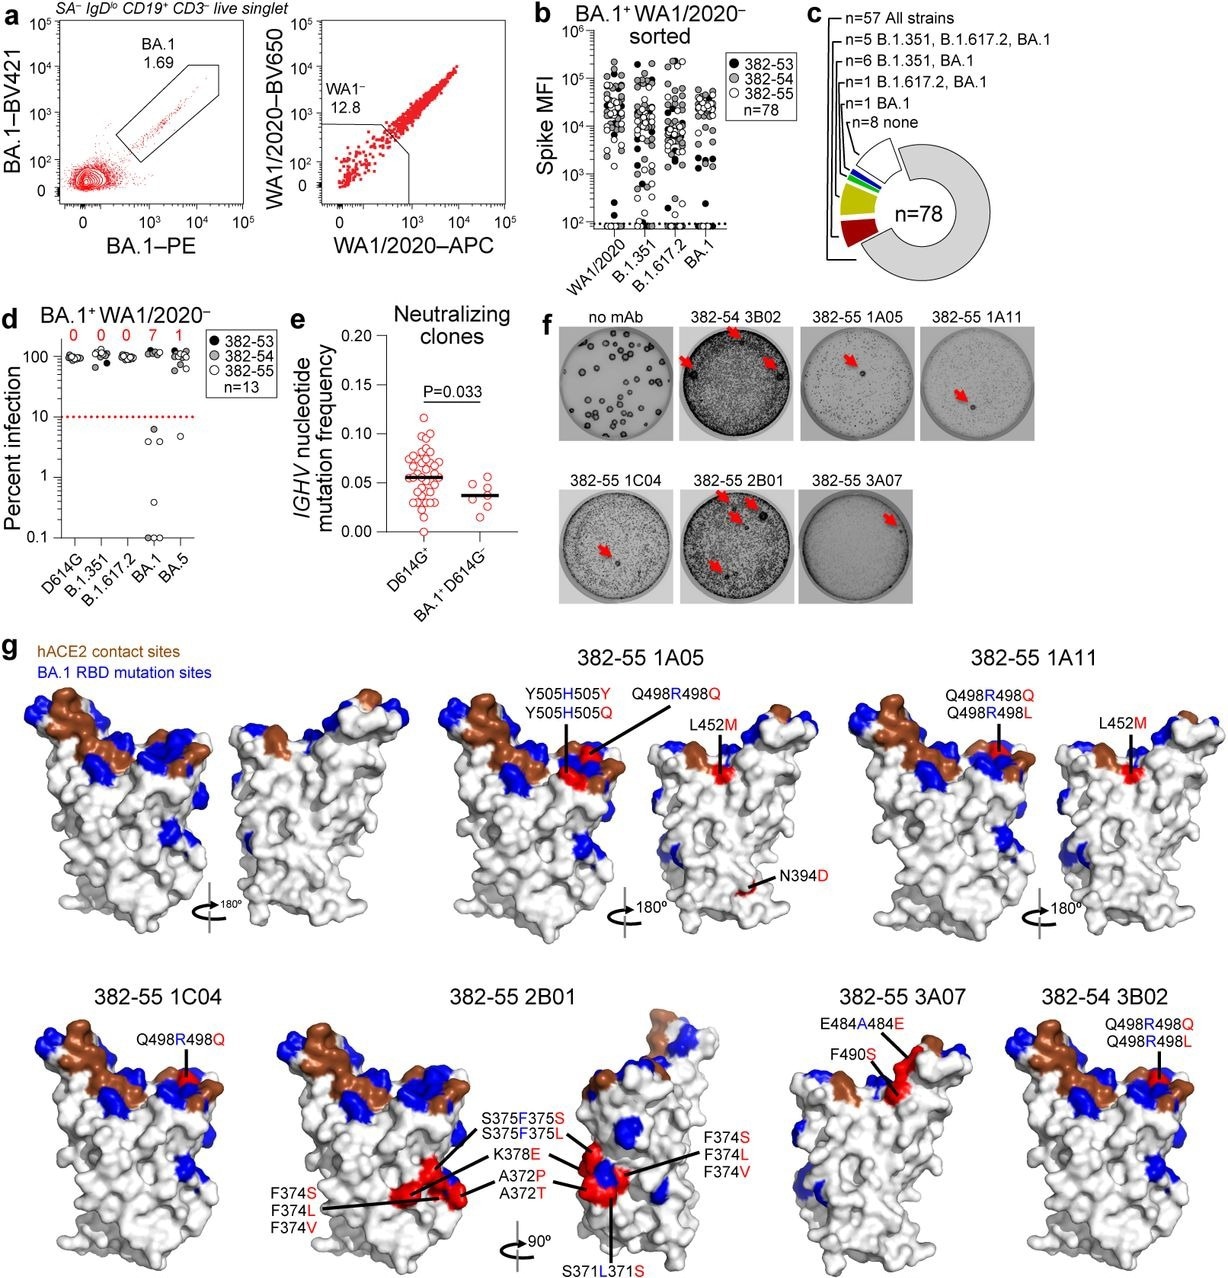 Characterization of BA.1-specific mAbs.  (a) Gating strategy for sorting BA.1+ WA1/2020− MBC 17 weeks after boost PBMC.  (b) Binding of mAbs from BA.1+ WA1/2020− sorted MBCs to indicated strains of SARS-CoV-2 S, measured using a multiplex bead-binding array.  (c) Summary of mAb binding.  (d) Neutralizing activity of BA.1+ WA1/2020− binding mAbs against the indicated strains of authentic SARS-CoV-2 virus.  The numbers above each virus refer to mAbs below the 90% infection reduction threshold.  (e) IGHV mutation frequencies of clones related to the mAbs from participants 382-54 and 382-55 that neutralized D164G (left) and BA.1 but not D614G (right).  Black lines indicate medians.  Each symbol represents a sequence;  n = 39 for D614G+ and n = 7 for BA.1+ D614G−.  (f) Plaque assays on Vero E6 cells with indicated mAb in overlay to isolate escape mutants (red arrows).  Images are representative of three experiments per mAb.  (g) Structure of RBD with hACE2 footprint highlighted in brown, BA.1 mutations highlighted in blue, and amino acids whose substitution confers resistance to indicated mAbs in plaque assays highlighted in red.